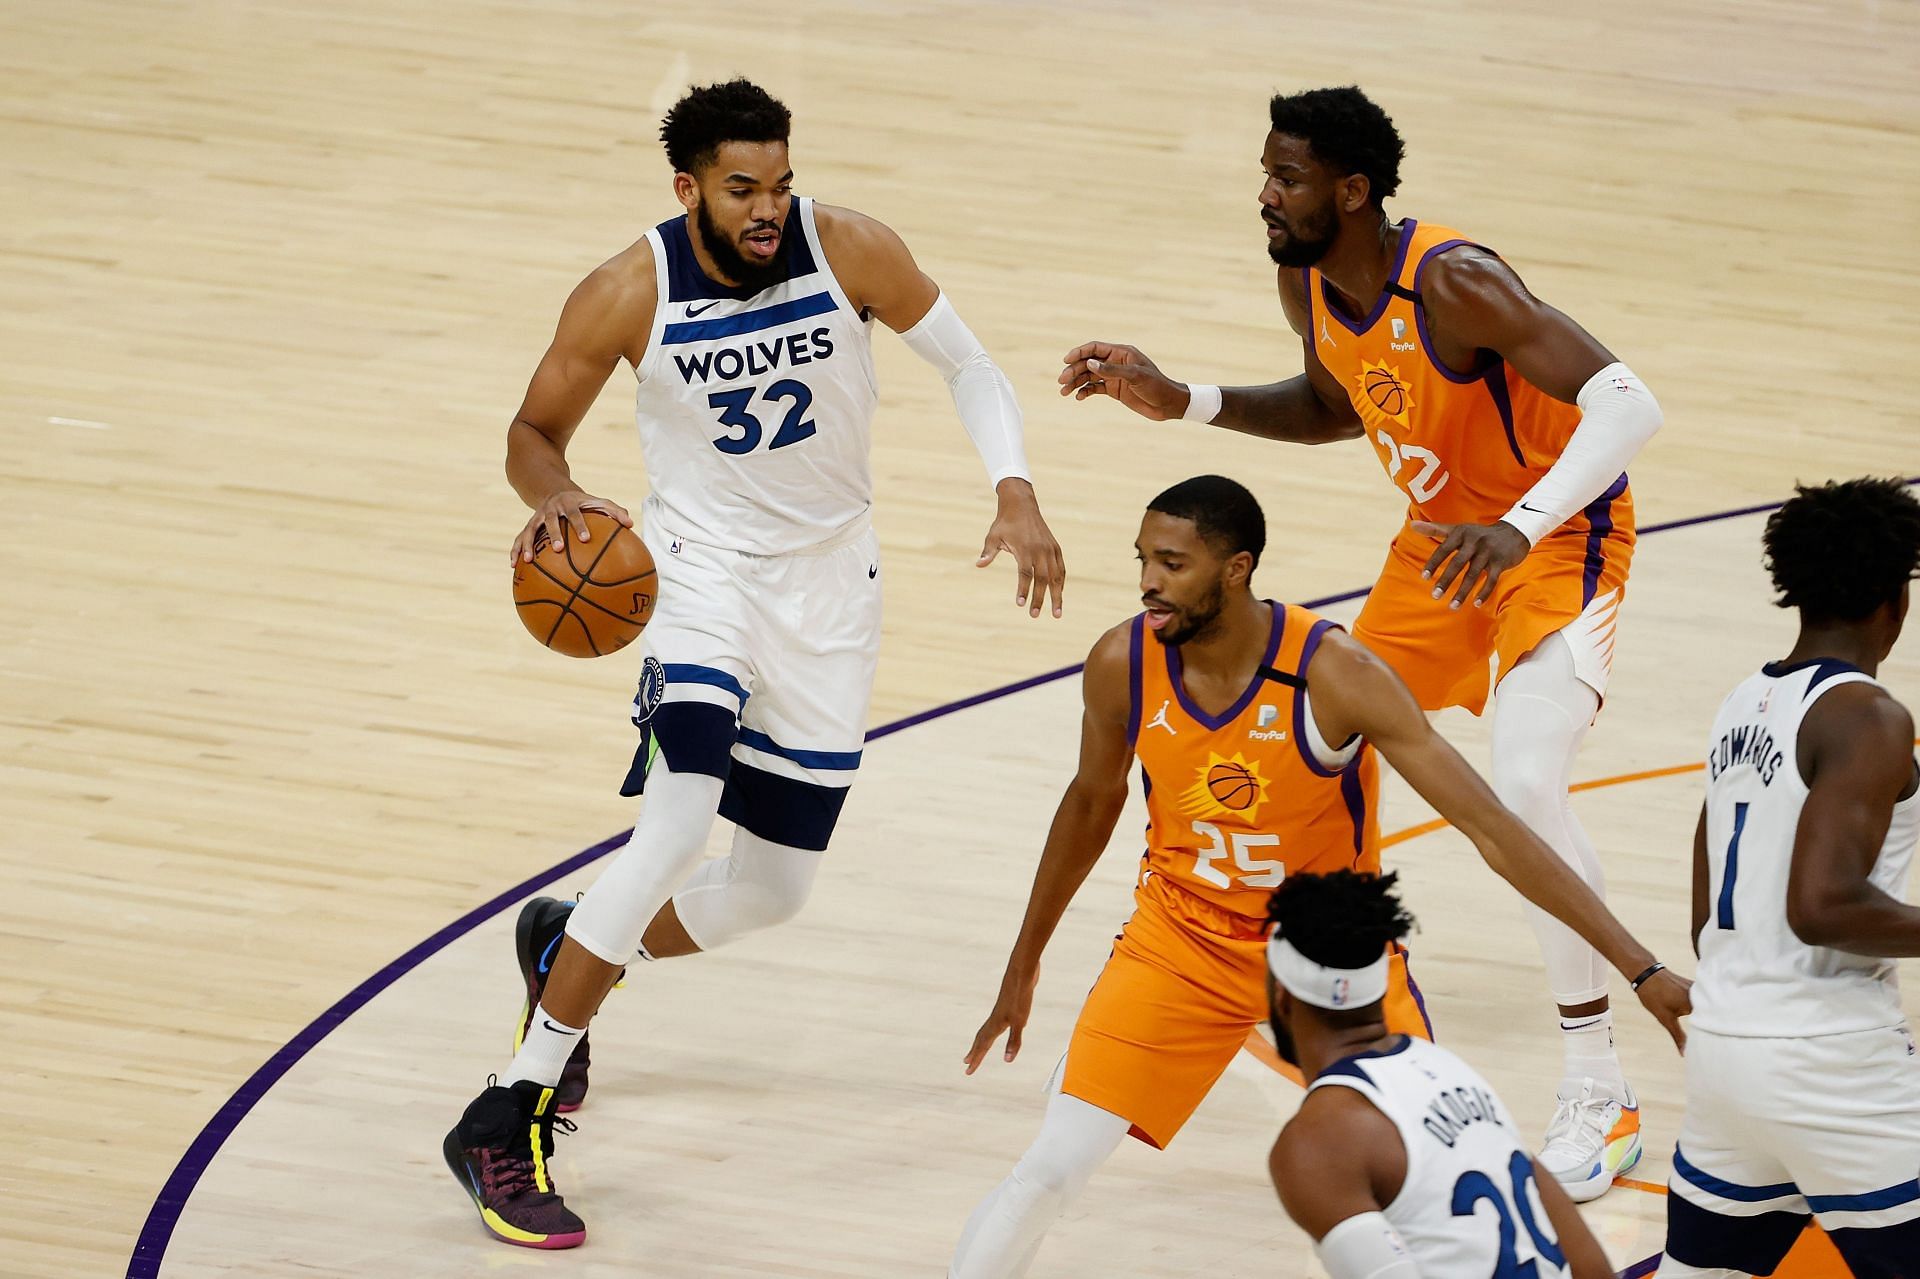 NBA 2022 Live: Timberwolves vs Suns Preview, Team News, Predicted Line-Ups and MIN vs PHX Dream11 Prediction